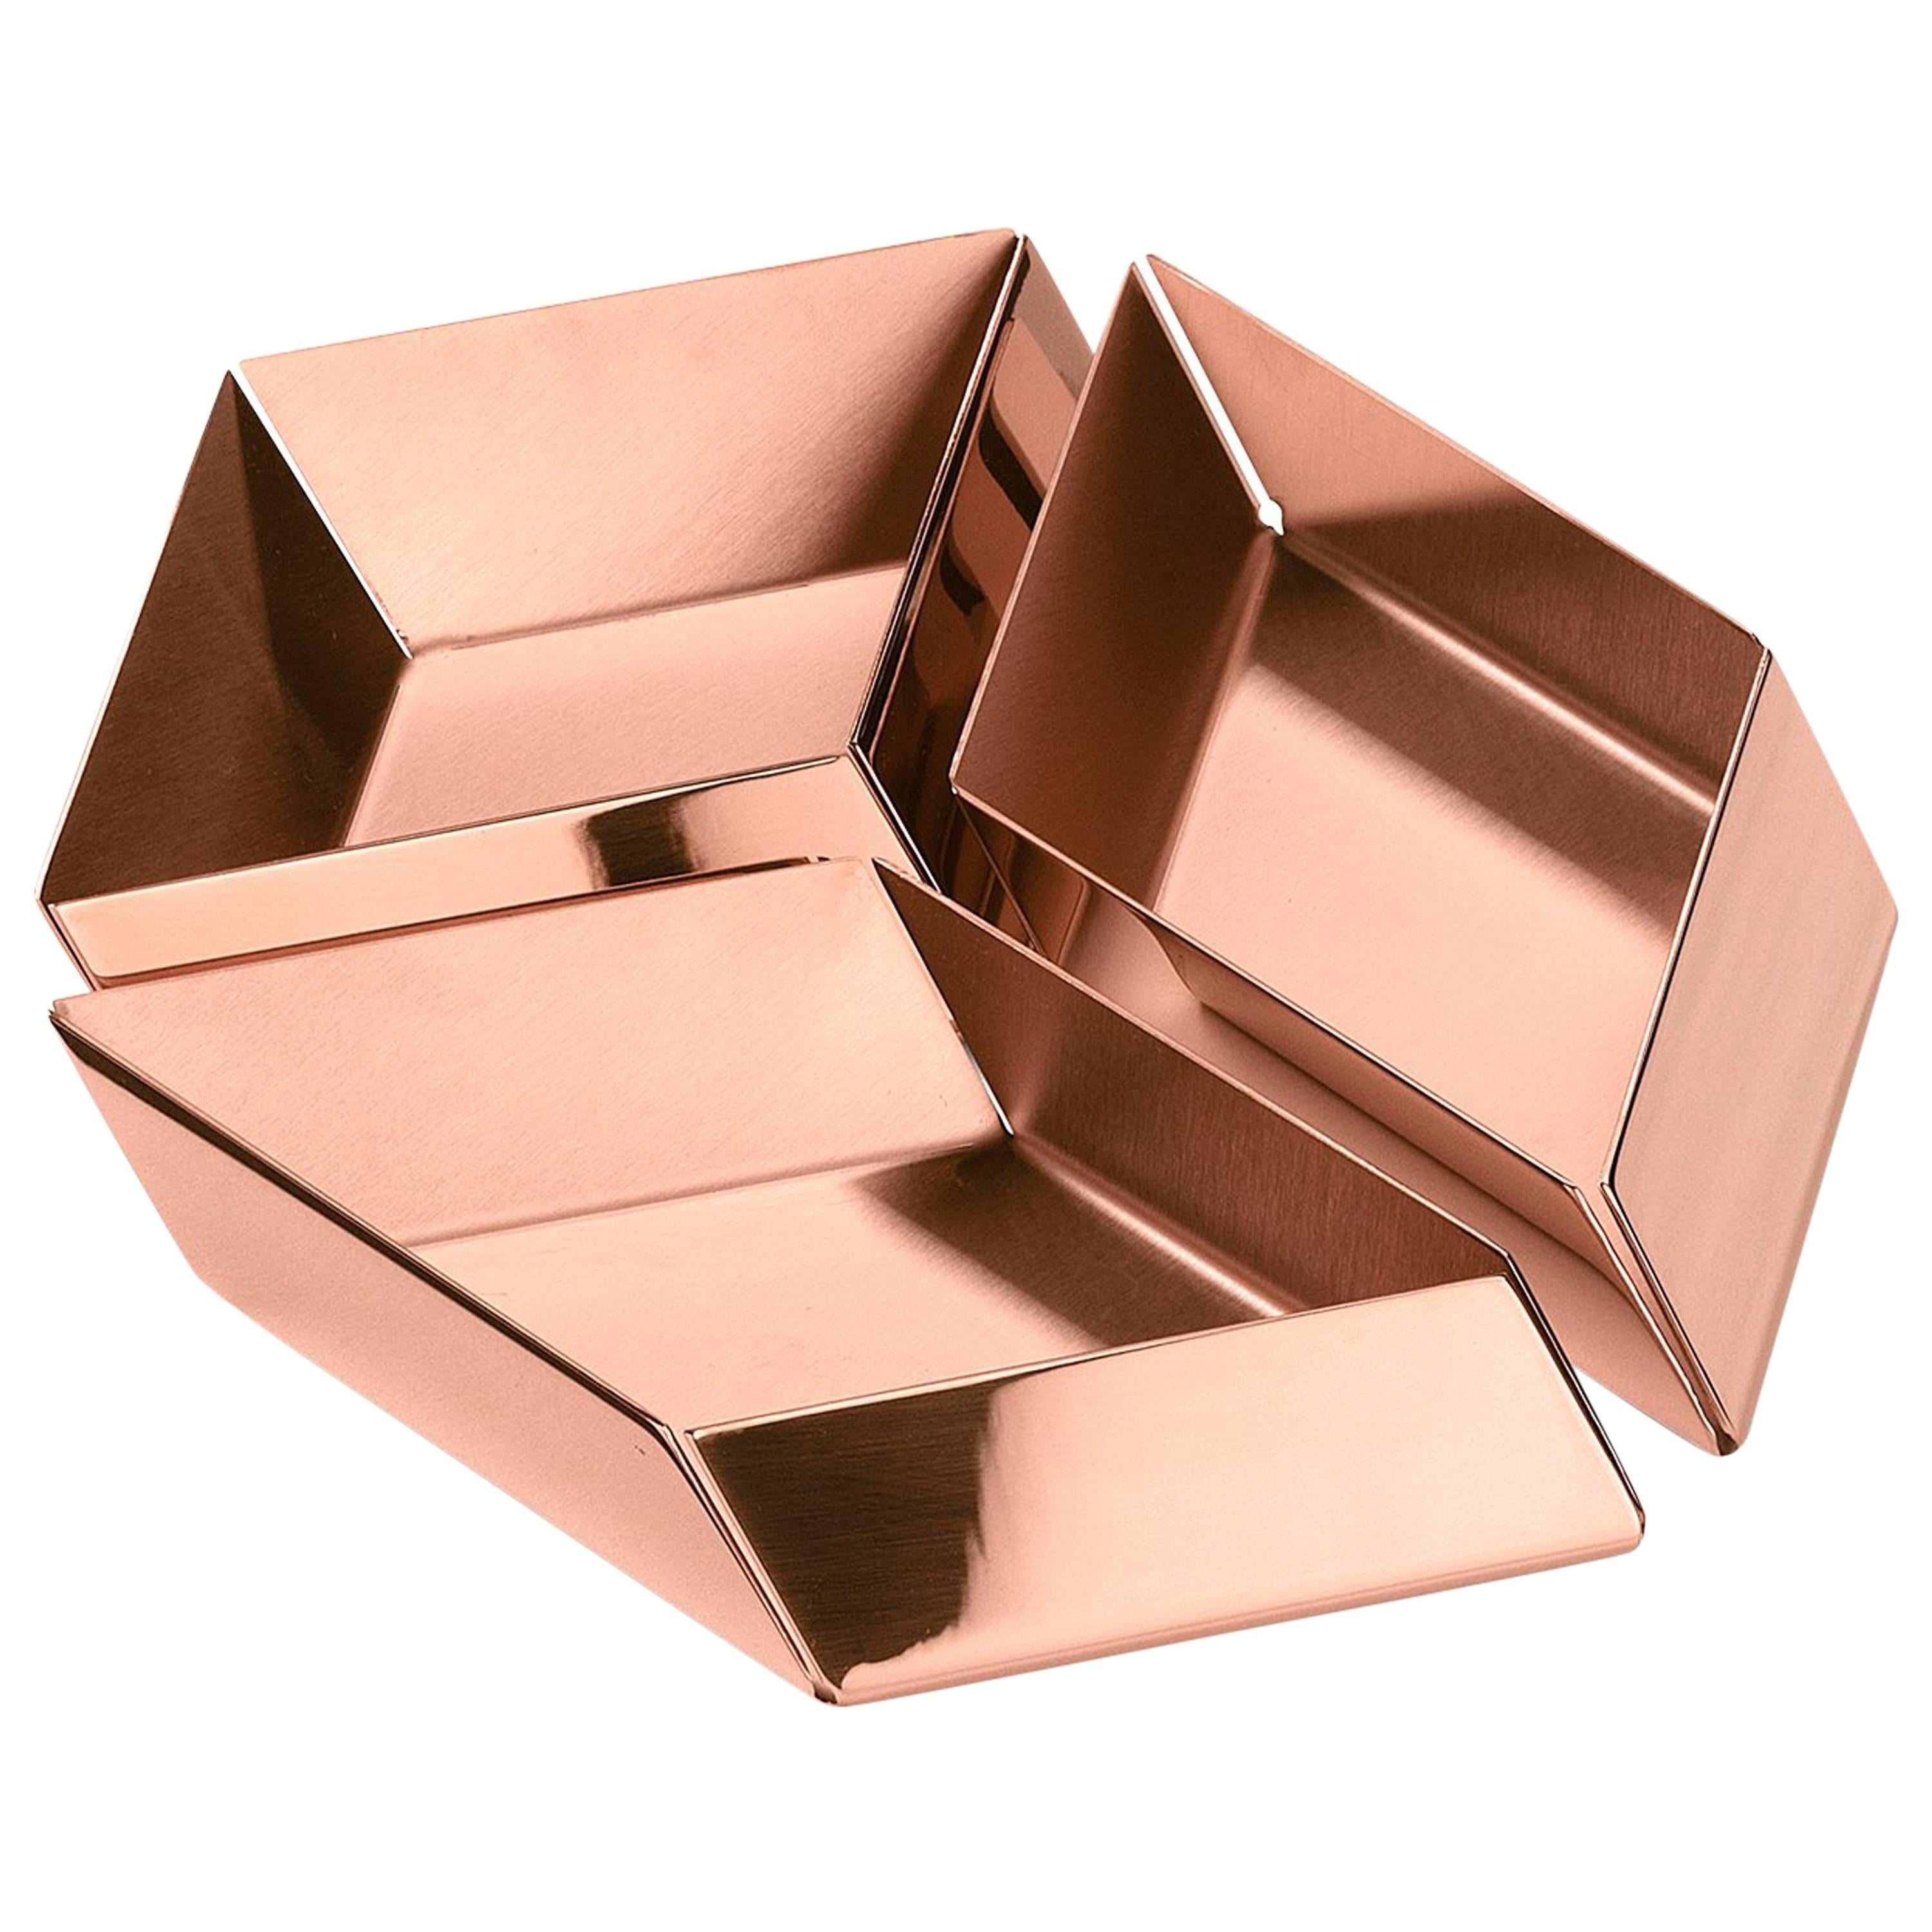 Ghidini 1961 Axonometry Set 1 Small Cube Tray in Rose Gold Finish For Sale